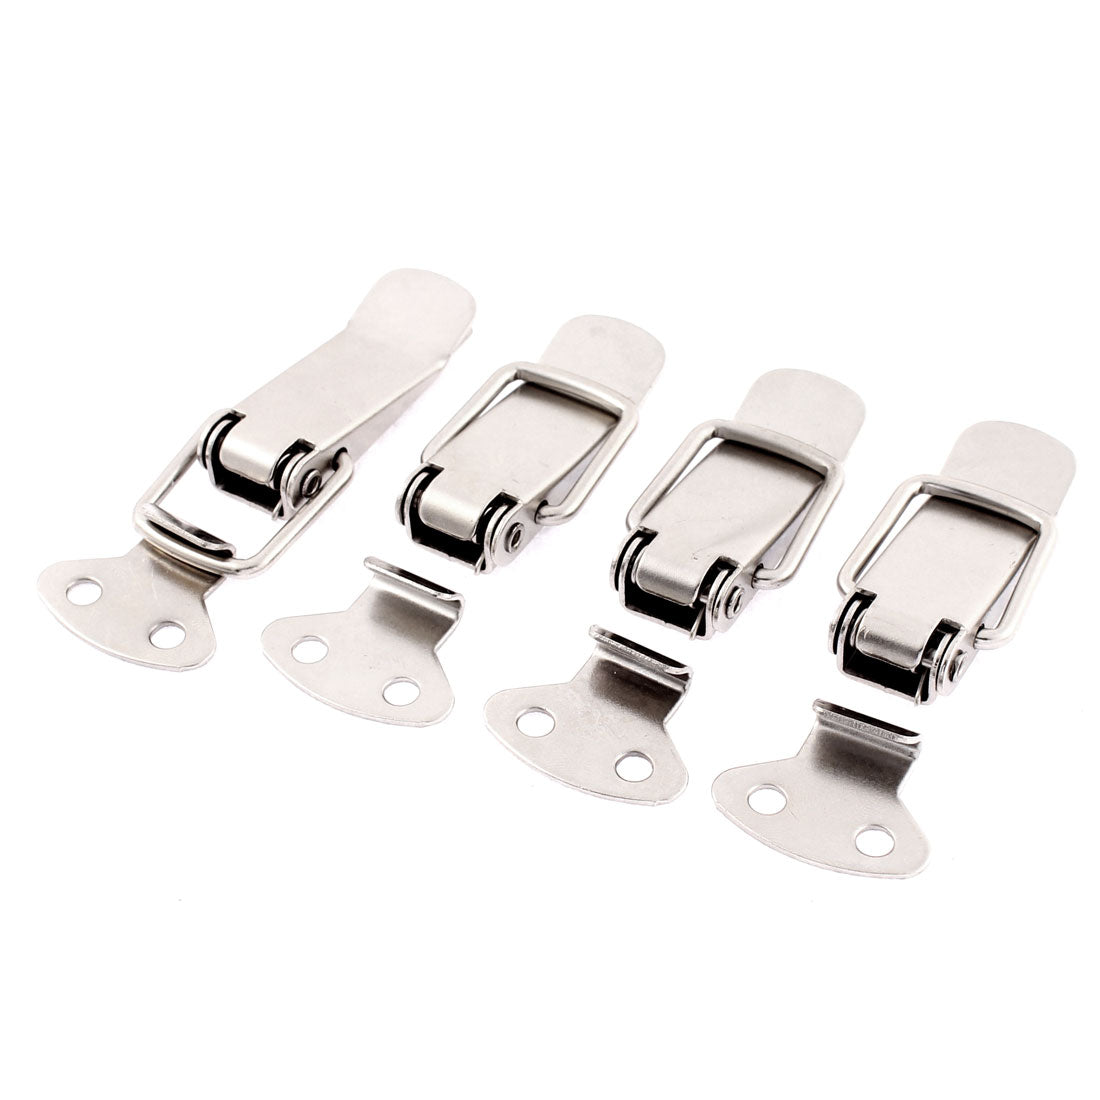 uxcell Uxcell Suitcase Case Chest Box Toggle Latch Catch Hasp 56mm Length 4Pcs